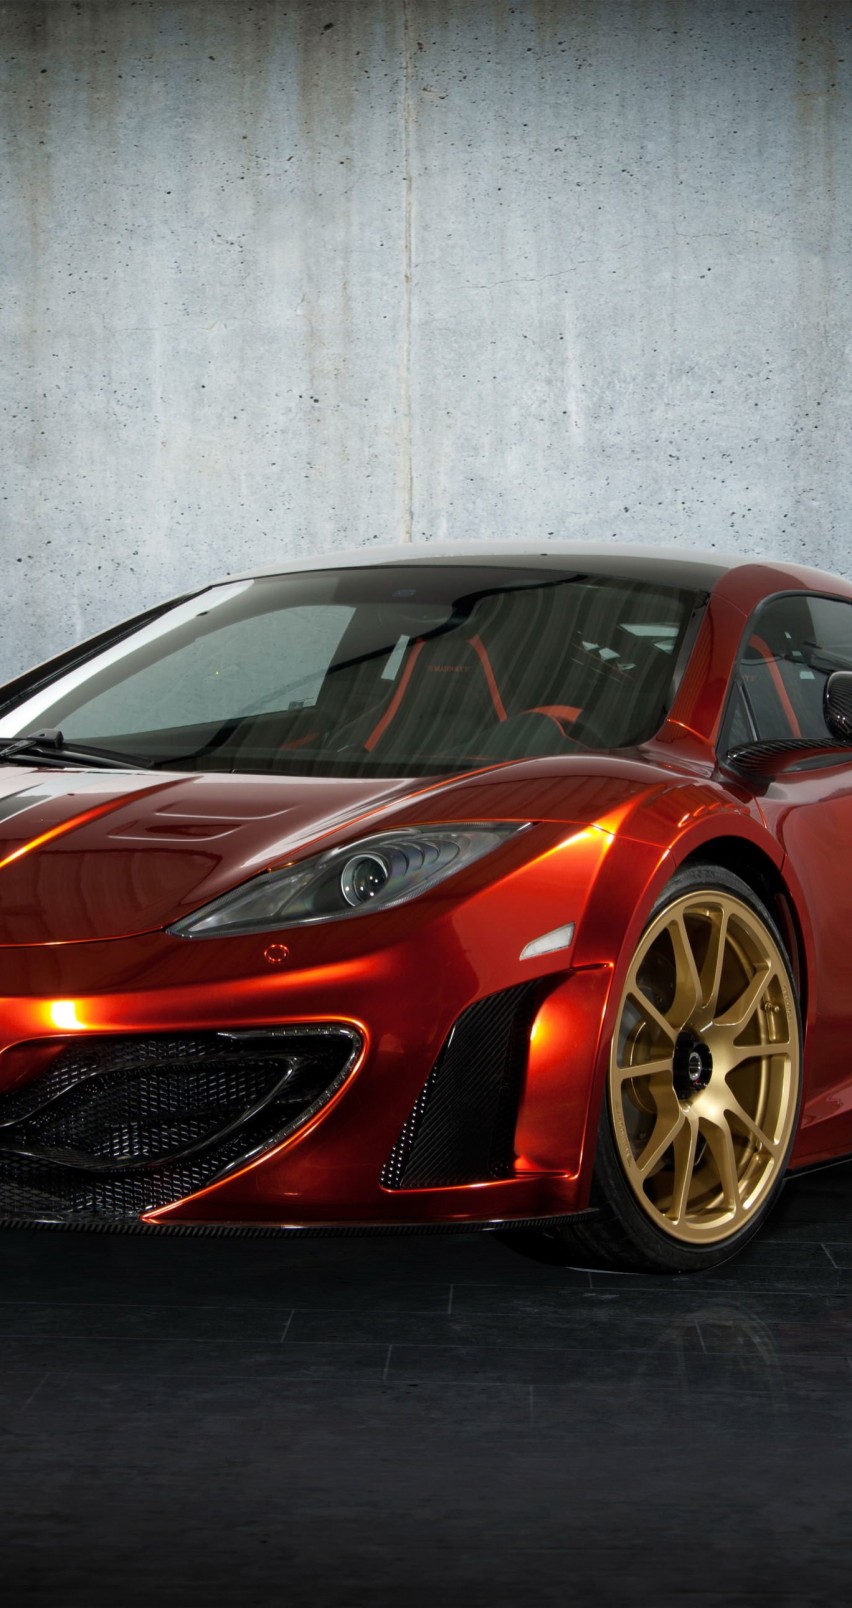 McLaren MP4-12Cf By Mansory Wallpaper for Apple iPhone 6 / 6s